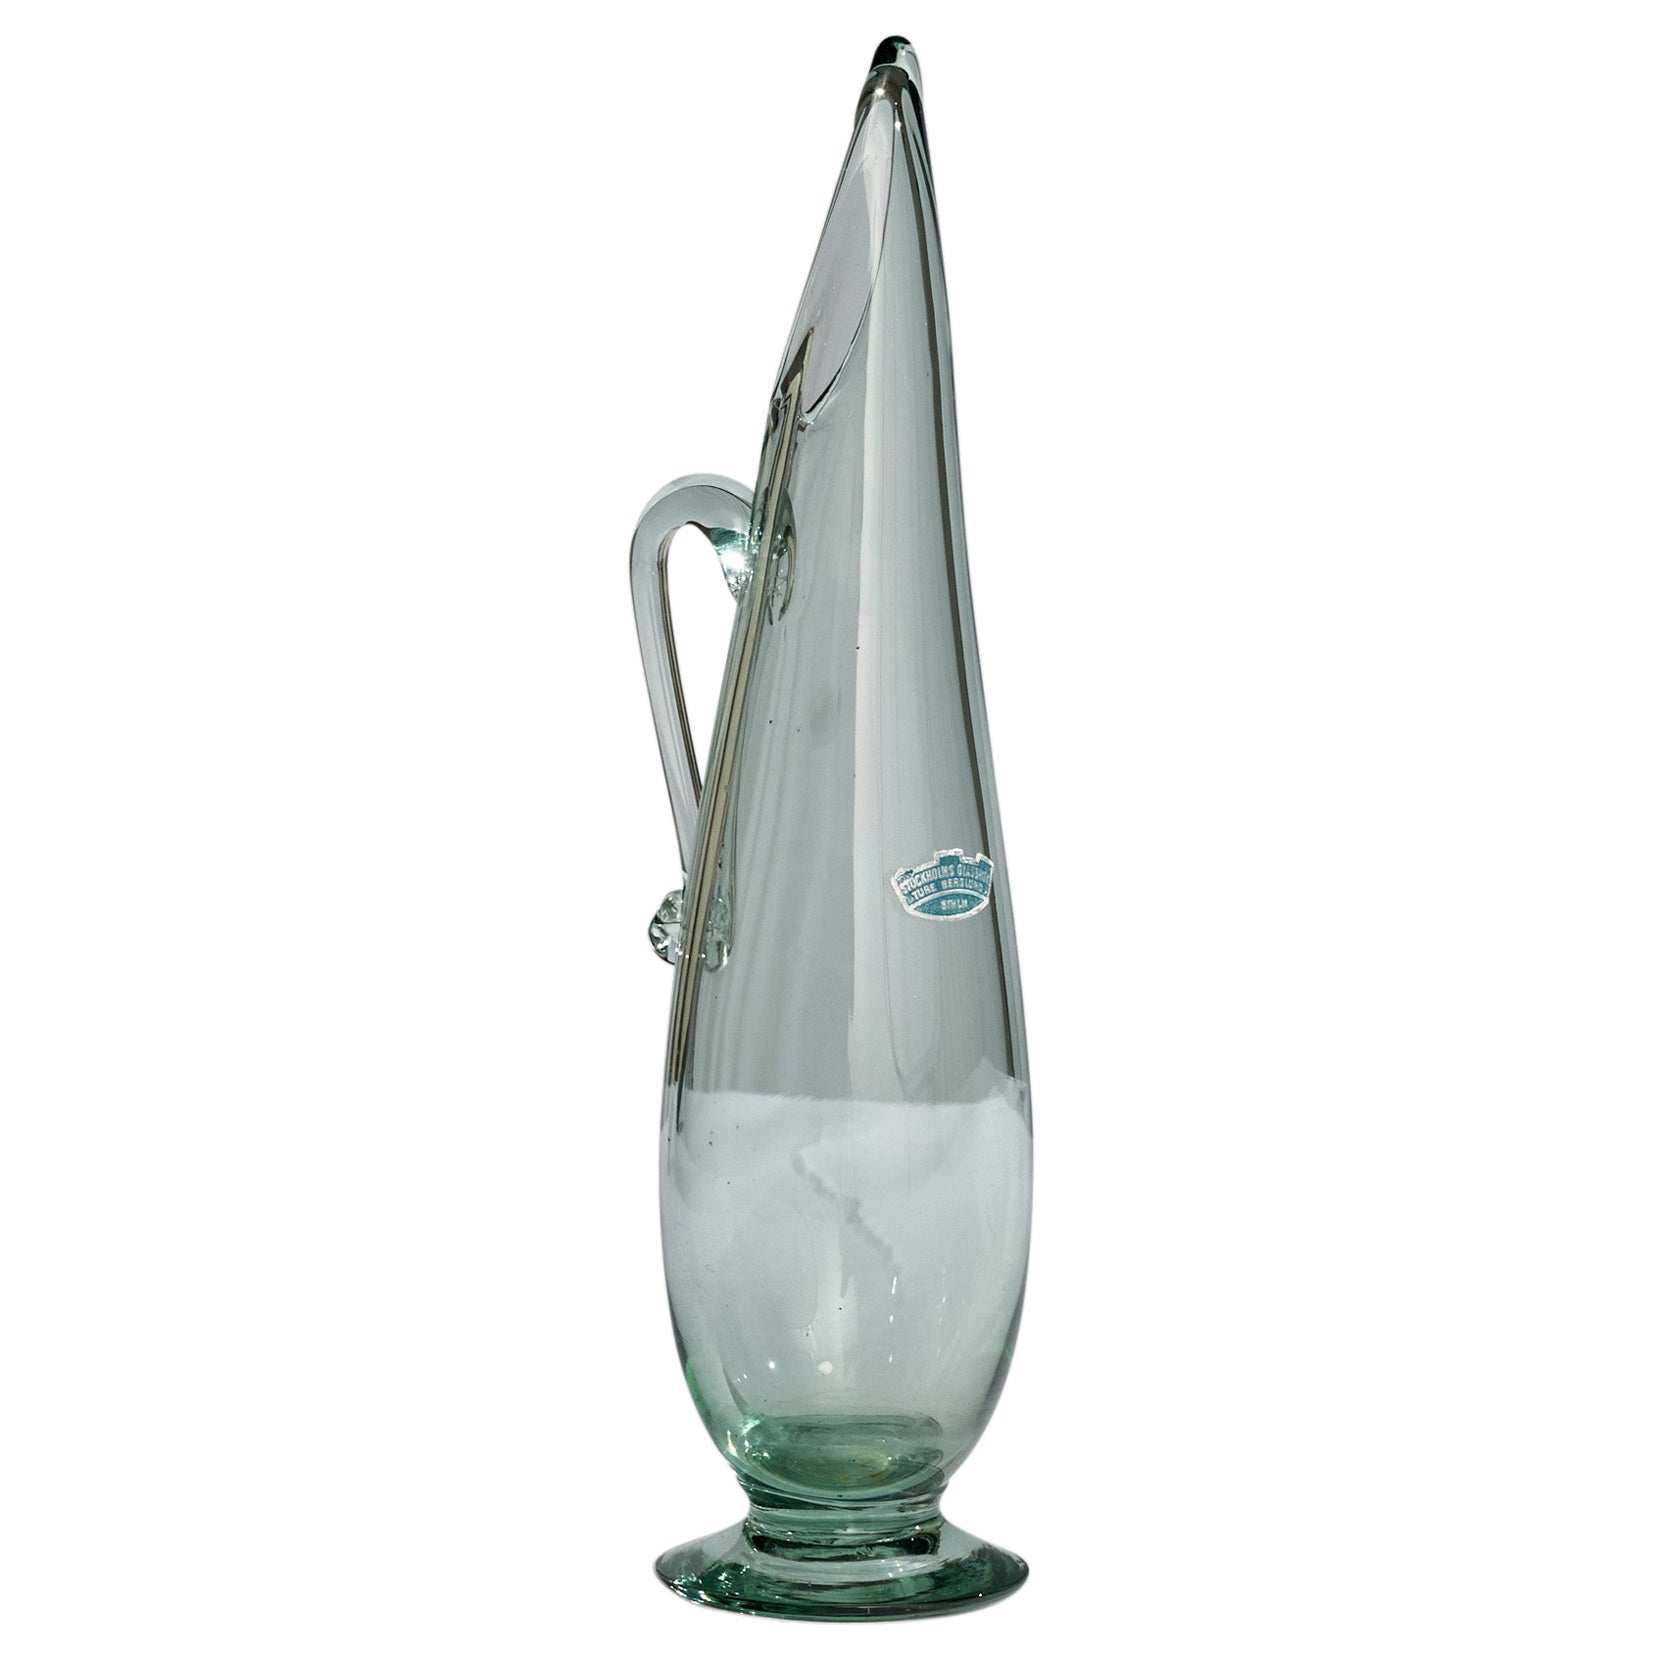 Ture Berglund, Small Pitcher, Glass, Sweden, 1940s